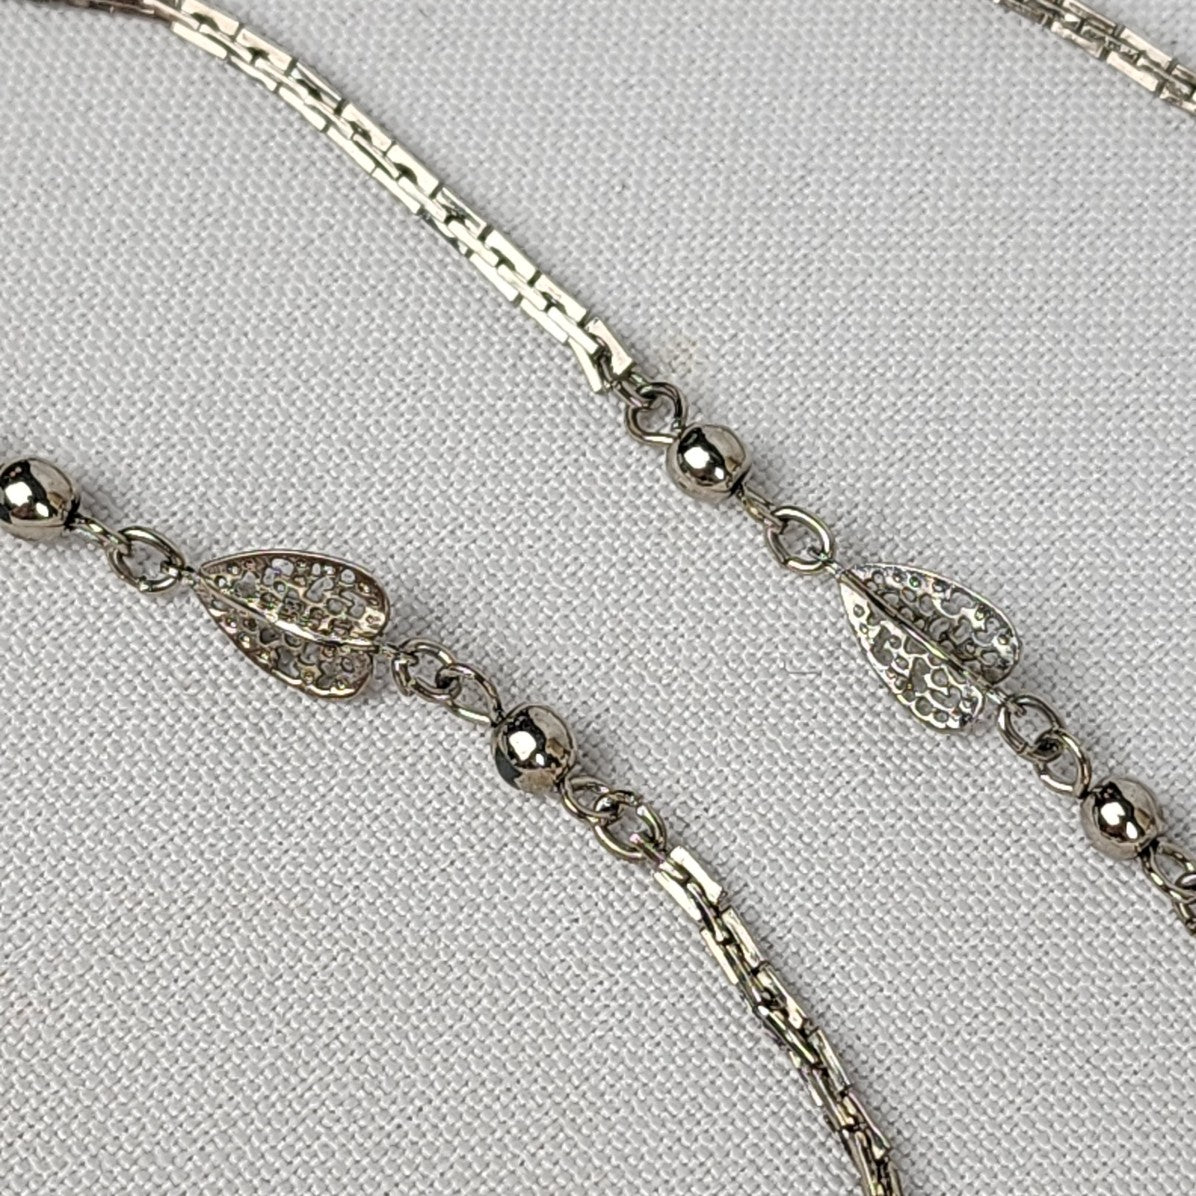 Vintage Silver Tone Chain Link Necklace